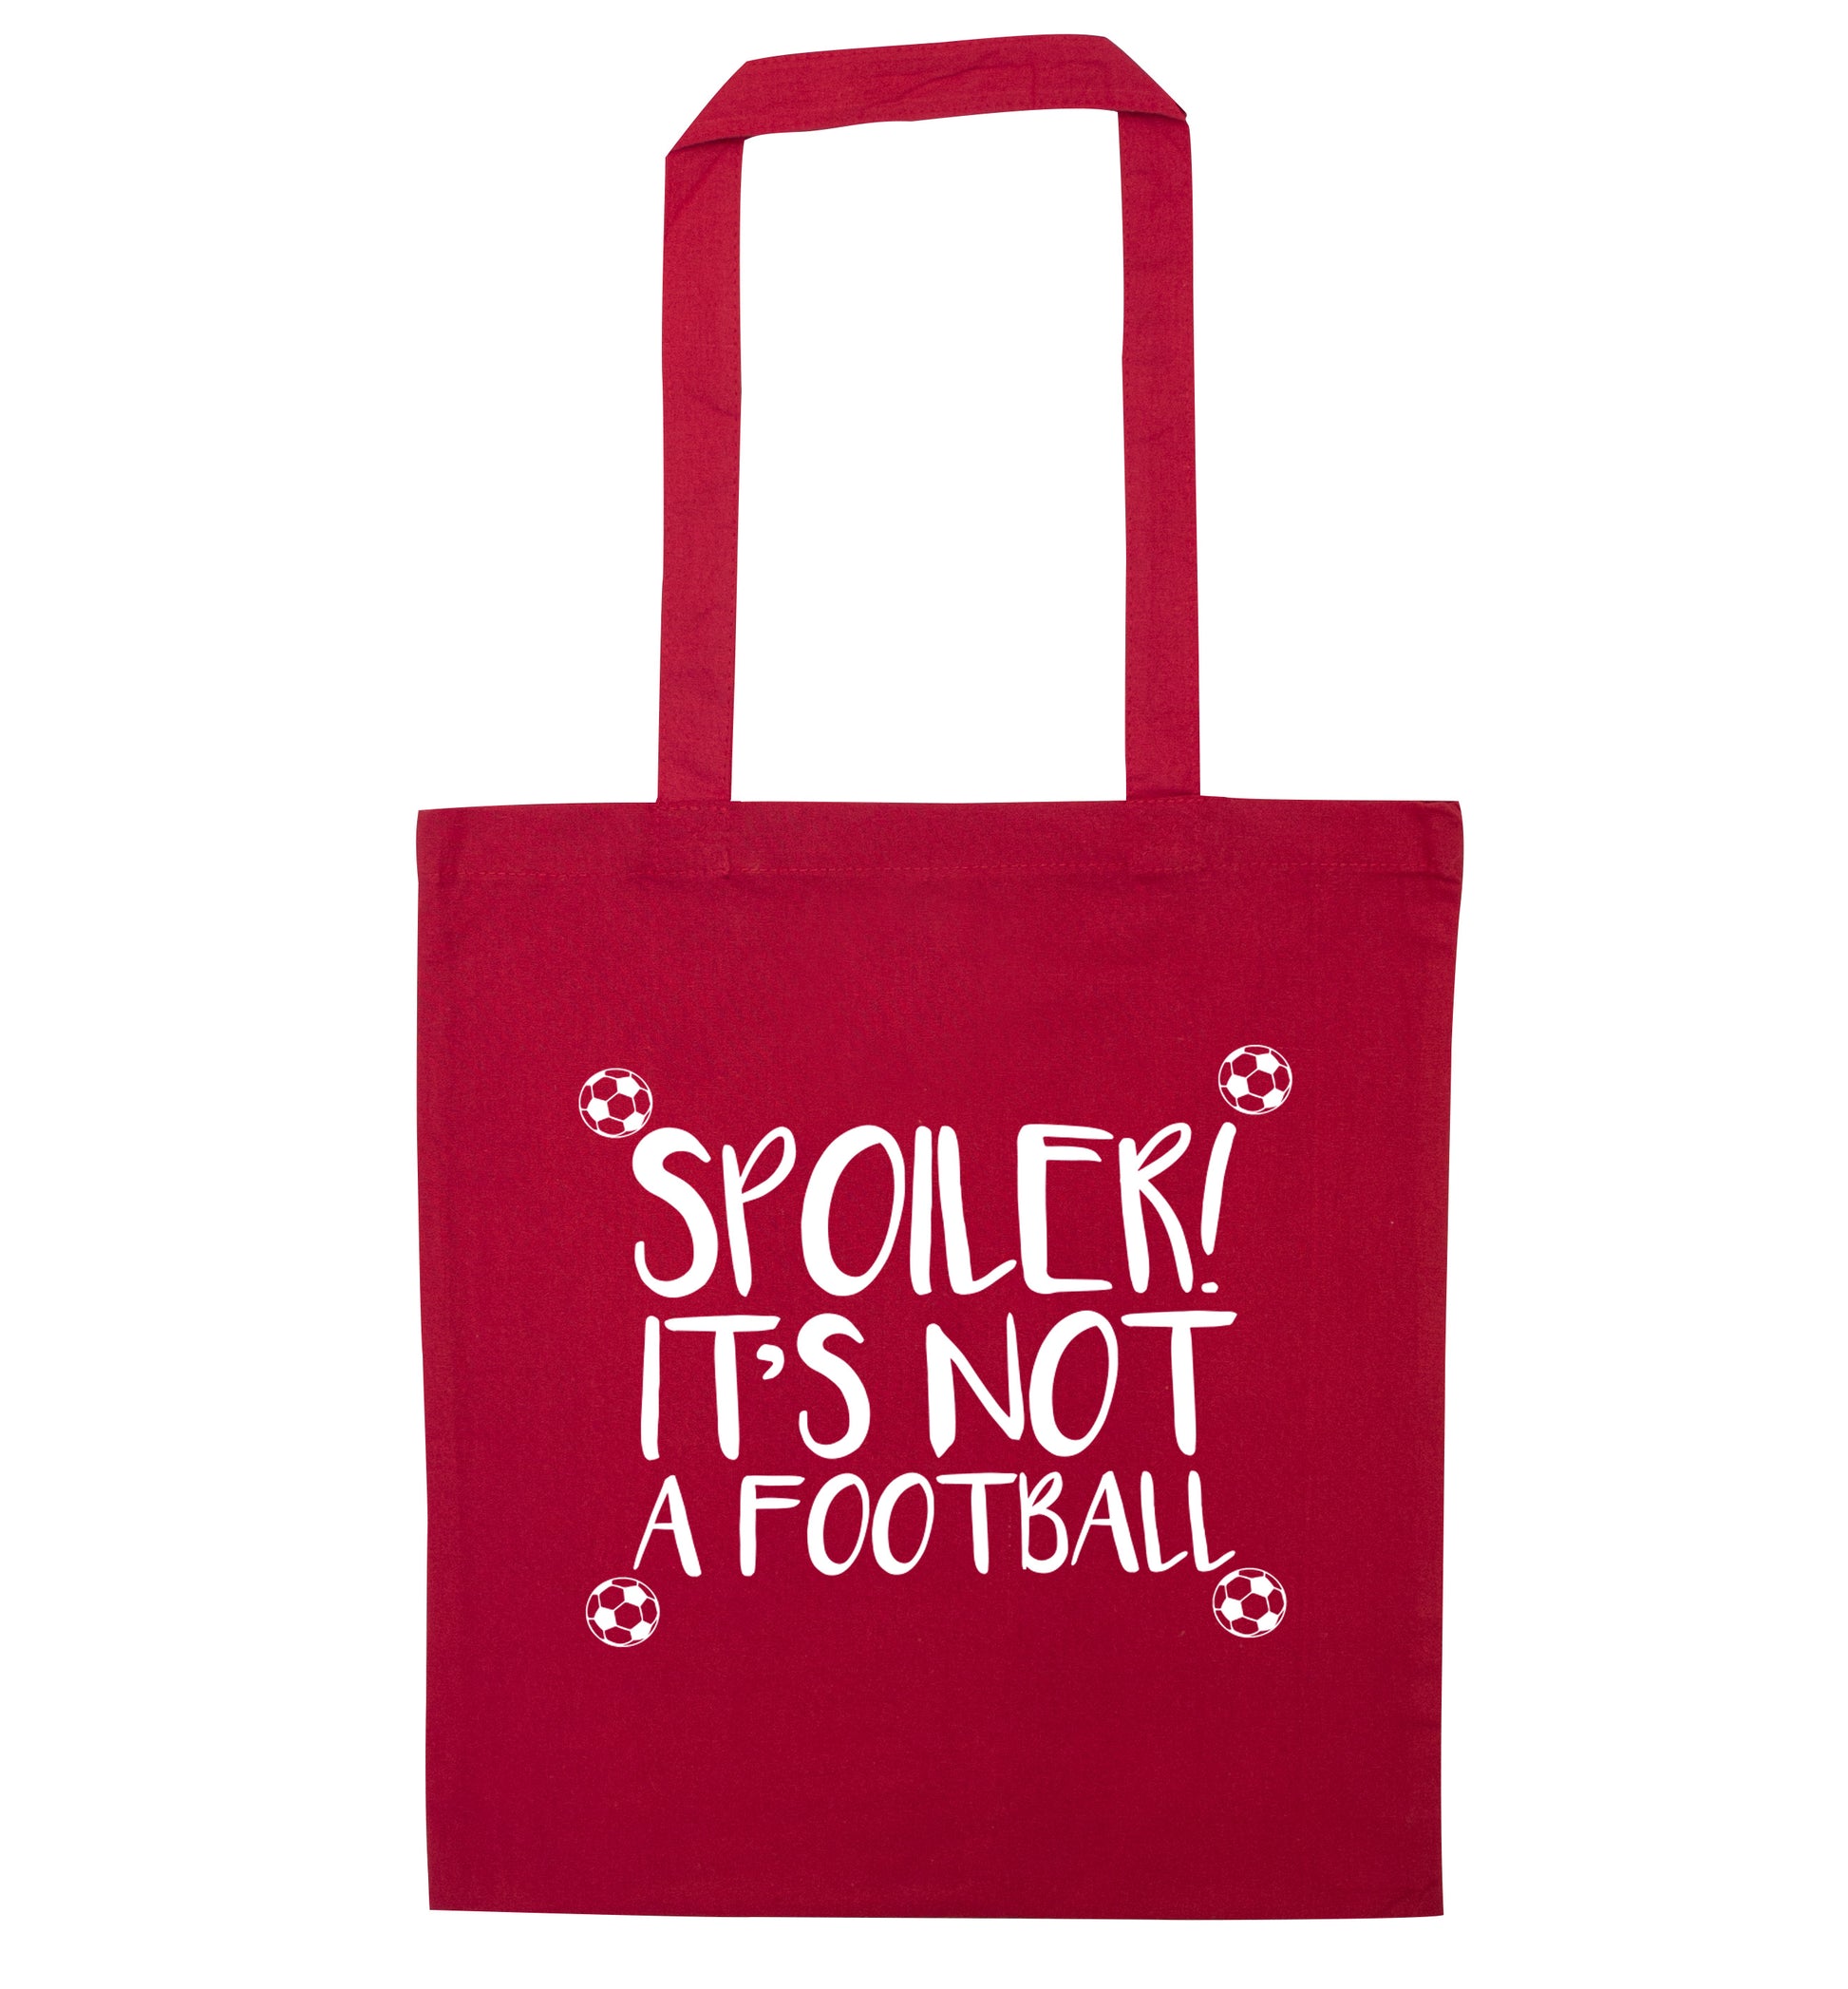 Spoiler it's not a football red tote bag